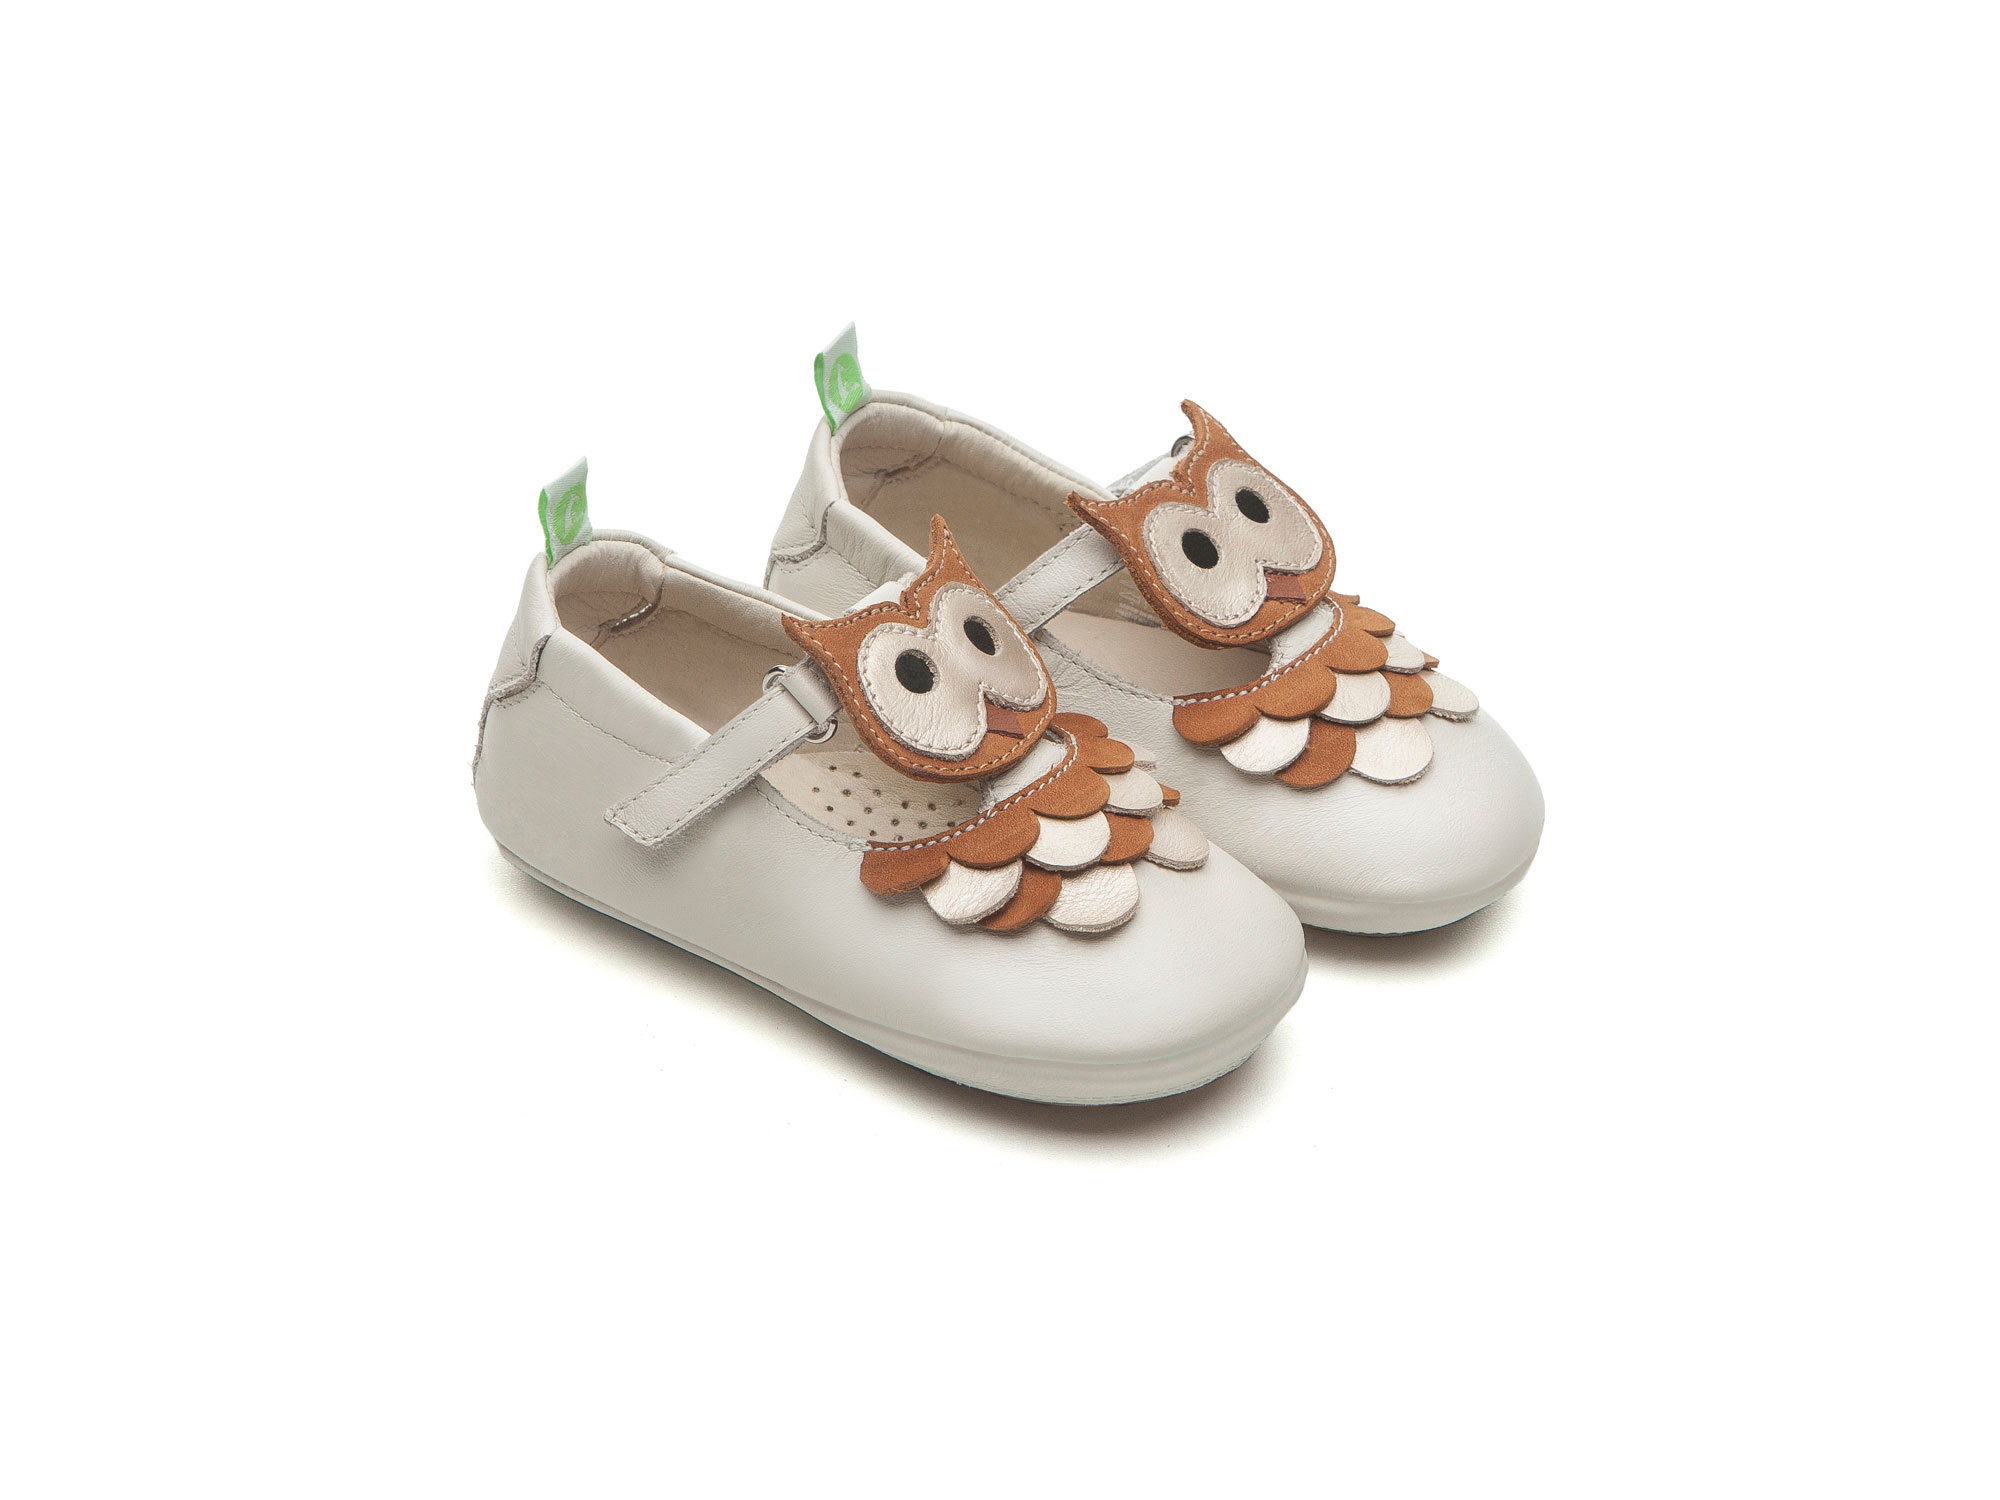 UP & GO Mary Janes for Girls Owlly | Tip Toey Joey - Australia - 0